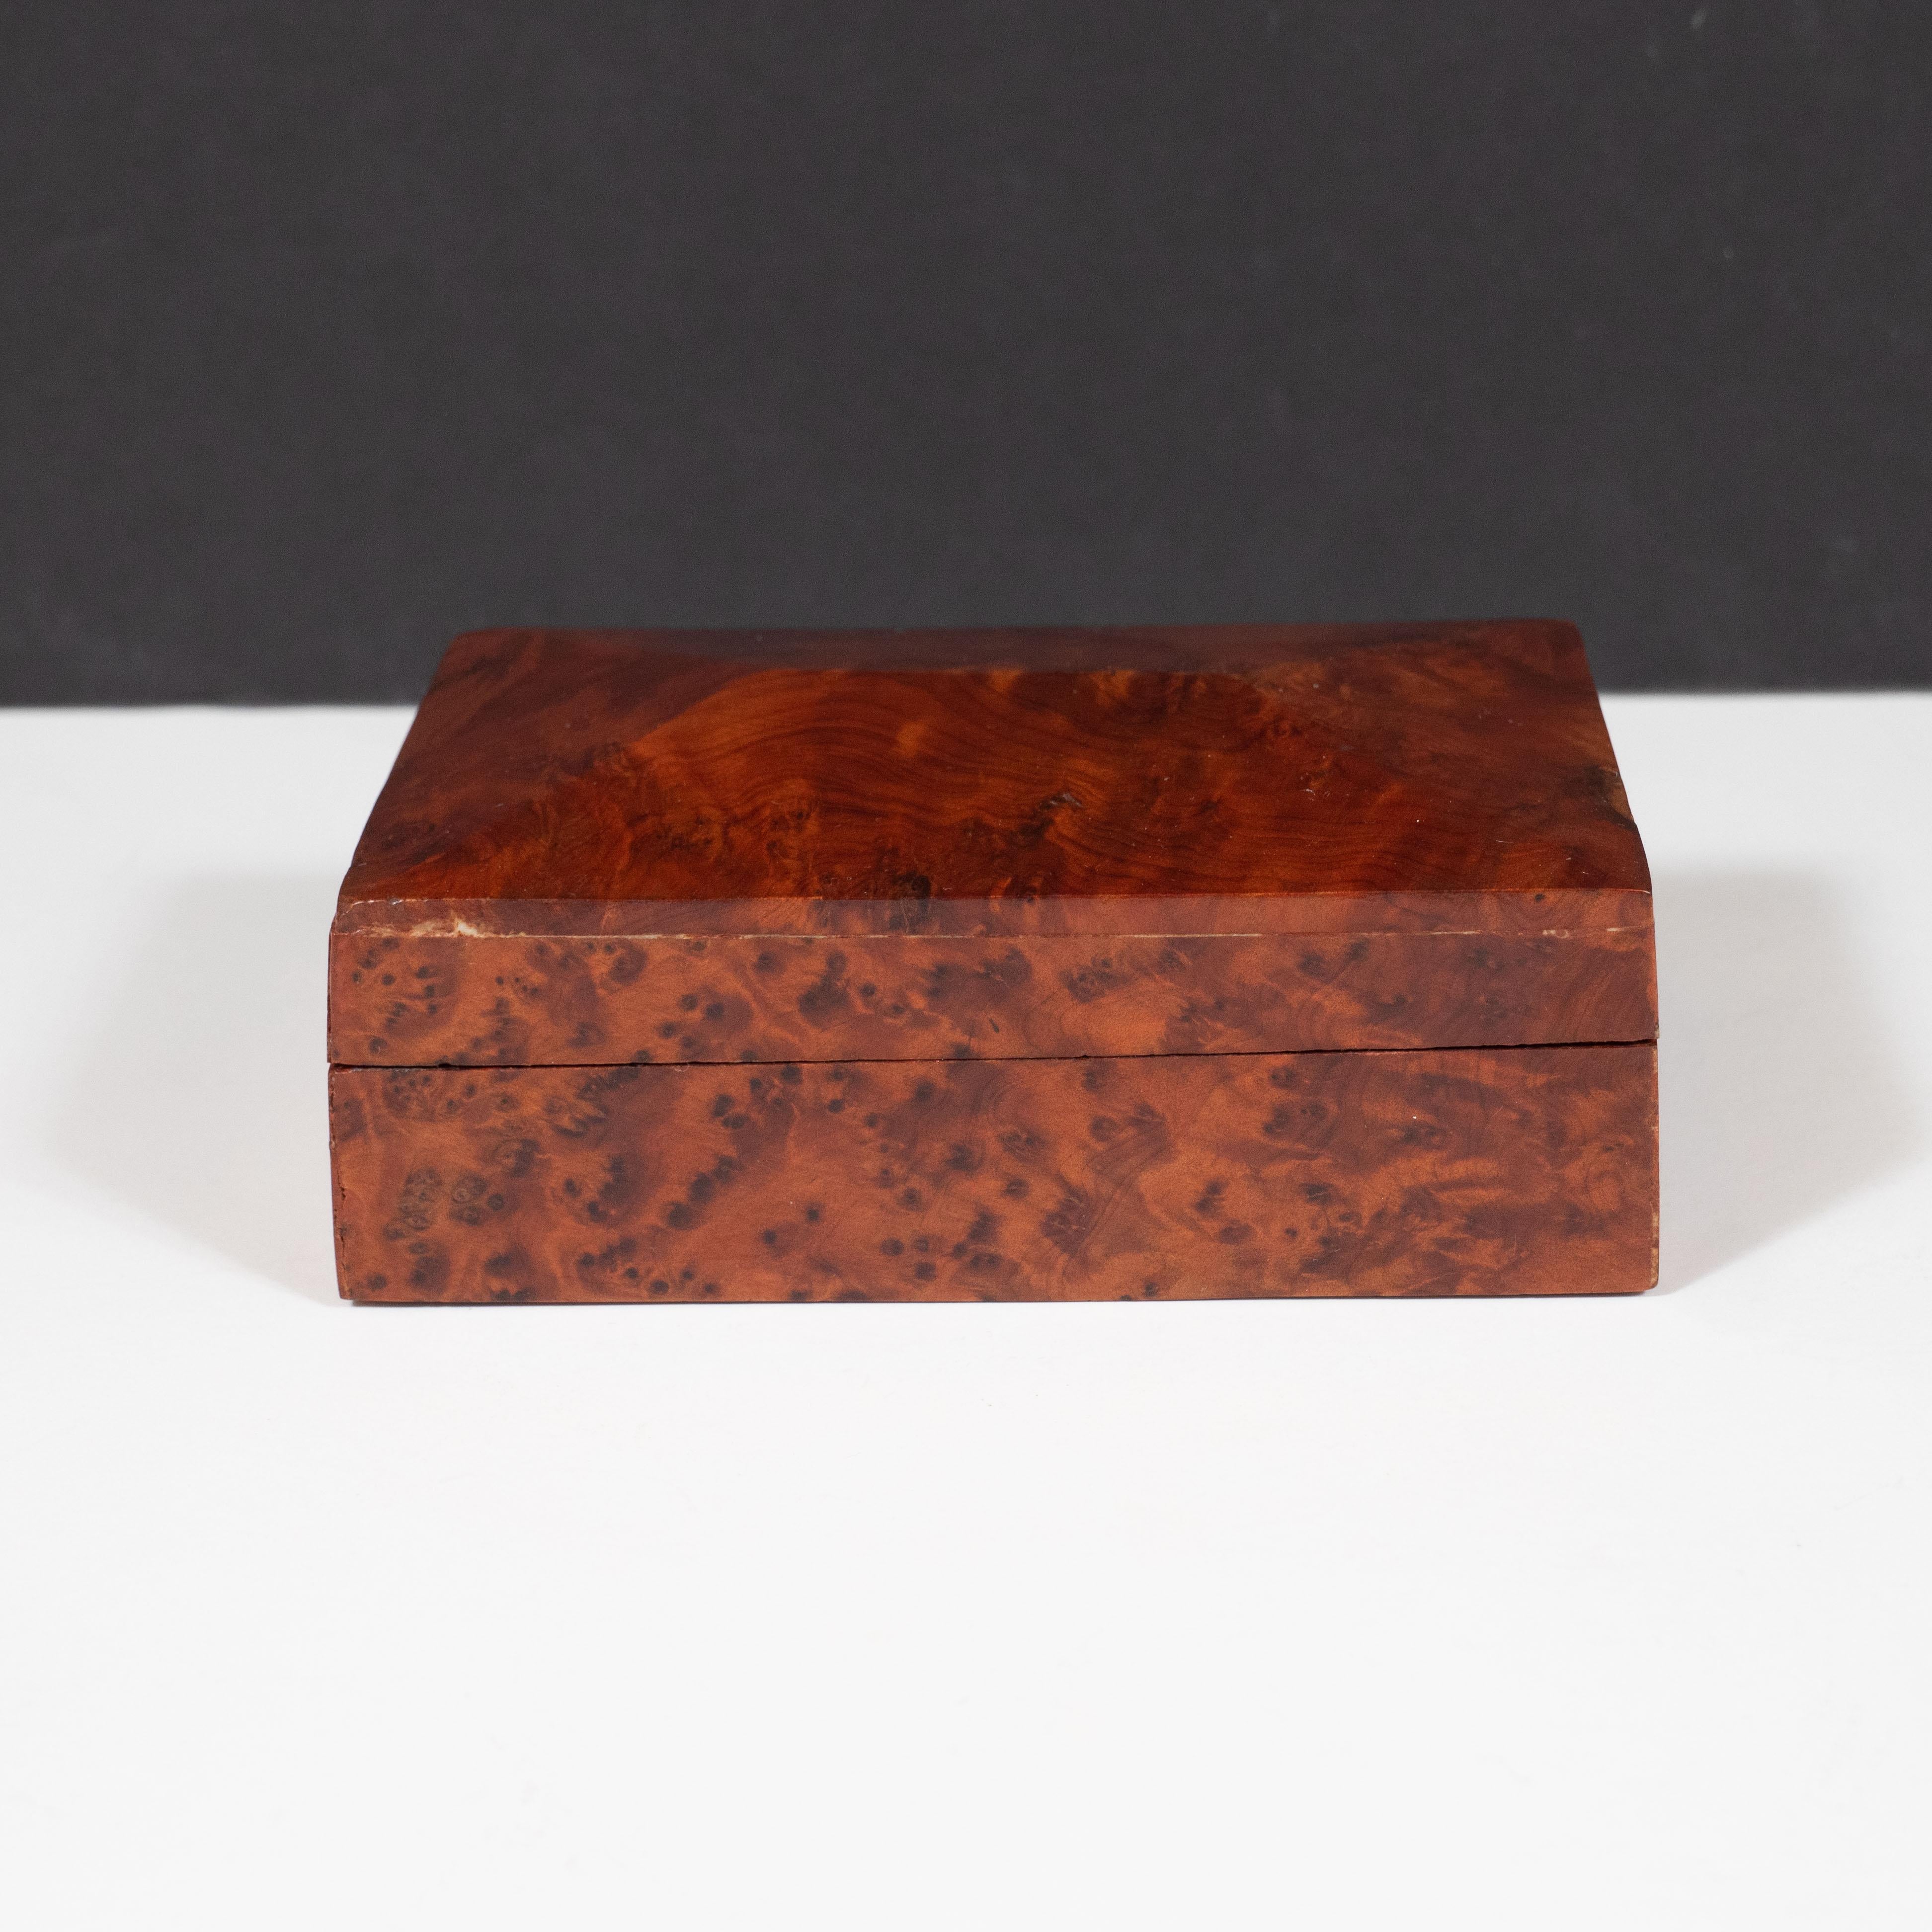 This elegant Art Deco box was realized in the United States circa 1960. It features a rectangular form in beautiful burled carpathian elm that showcases the naturally exquisite grain of the wood, as well as a peaked and faceted top. Organic, refined